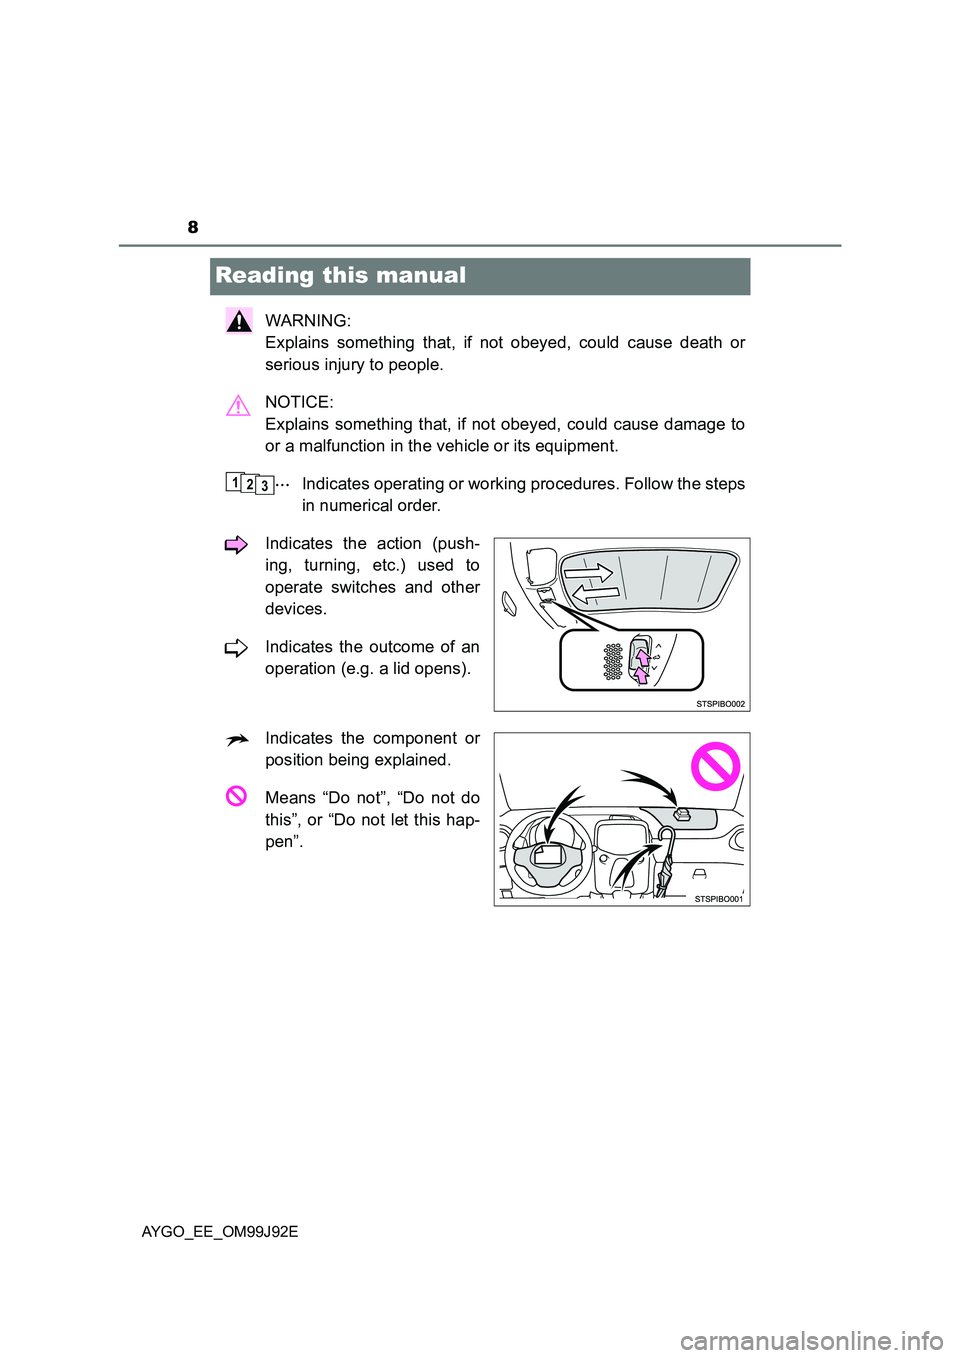 TOYOTA AYGO 2015  Owners Manual (in English) 8
AYGO_EE_OM99J92E
Reading this manual
WARNING:  
Explains something that, if not obeyed, could cause death or 
serious injury to people. 
NOTICE:  
Explains something that, if not obeyed, could cause